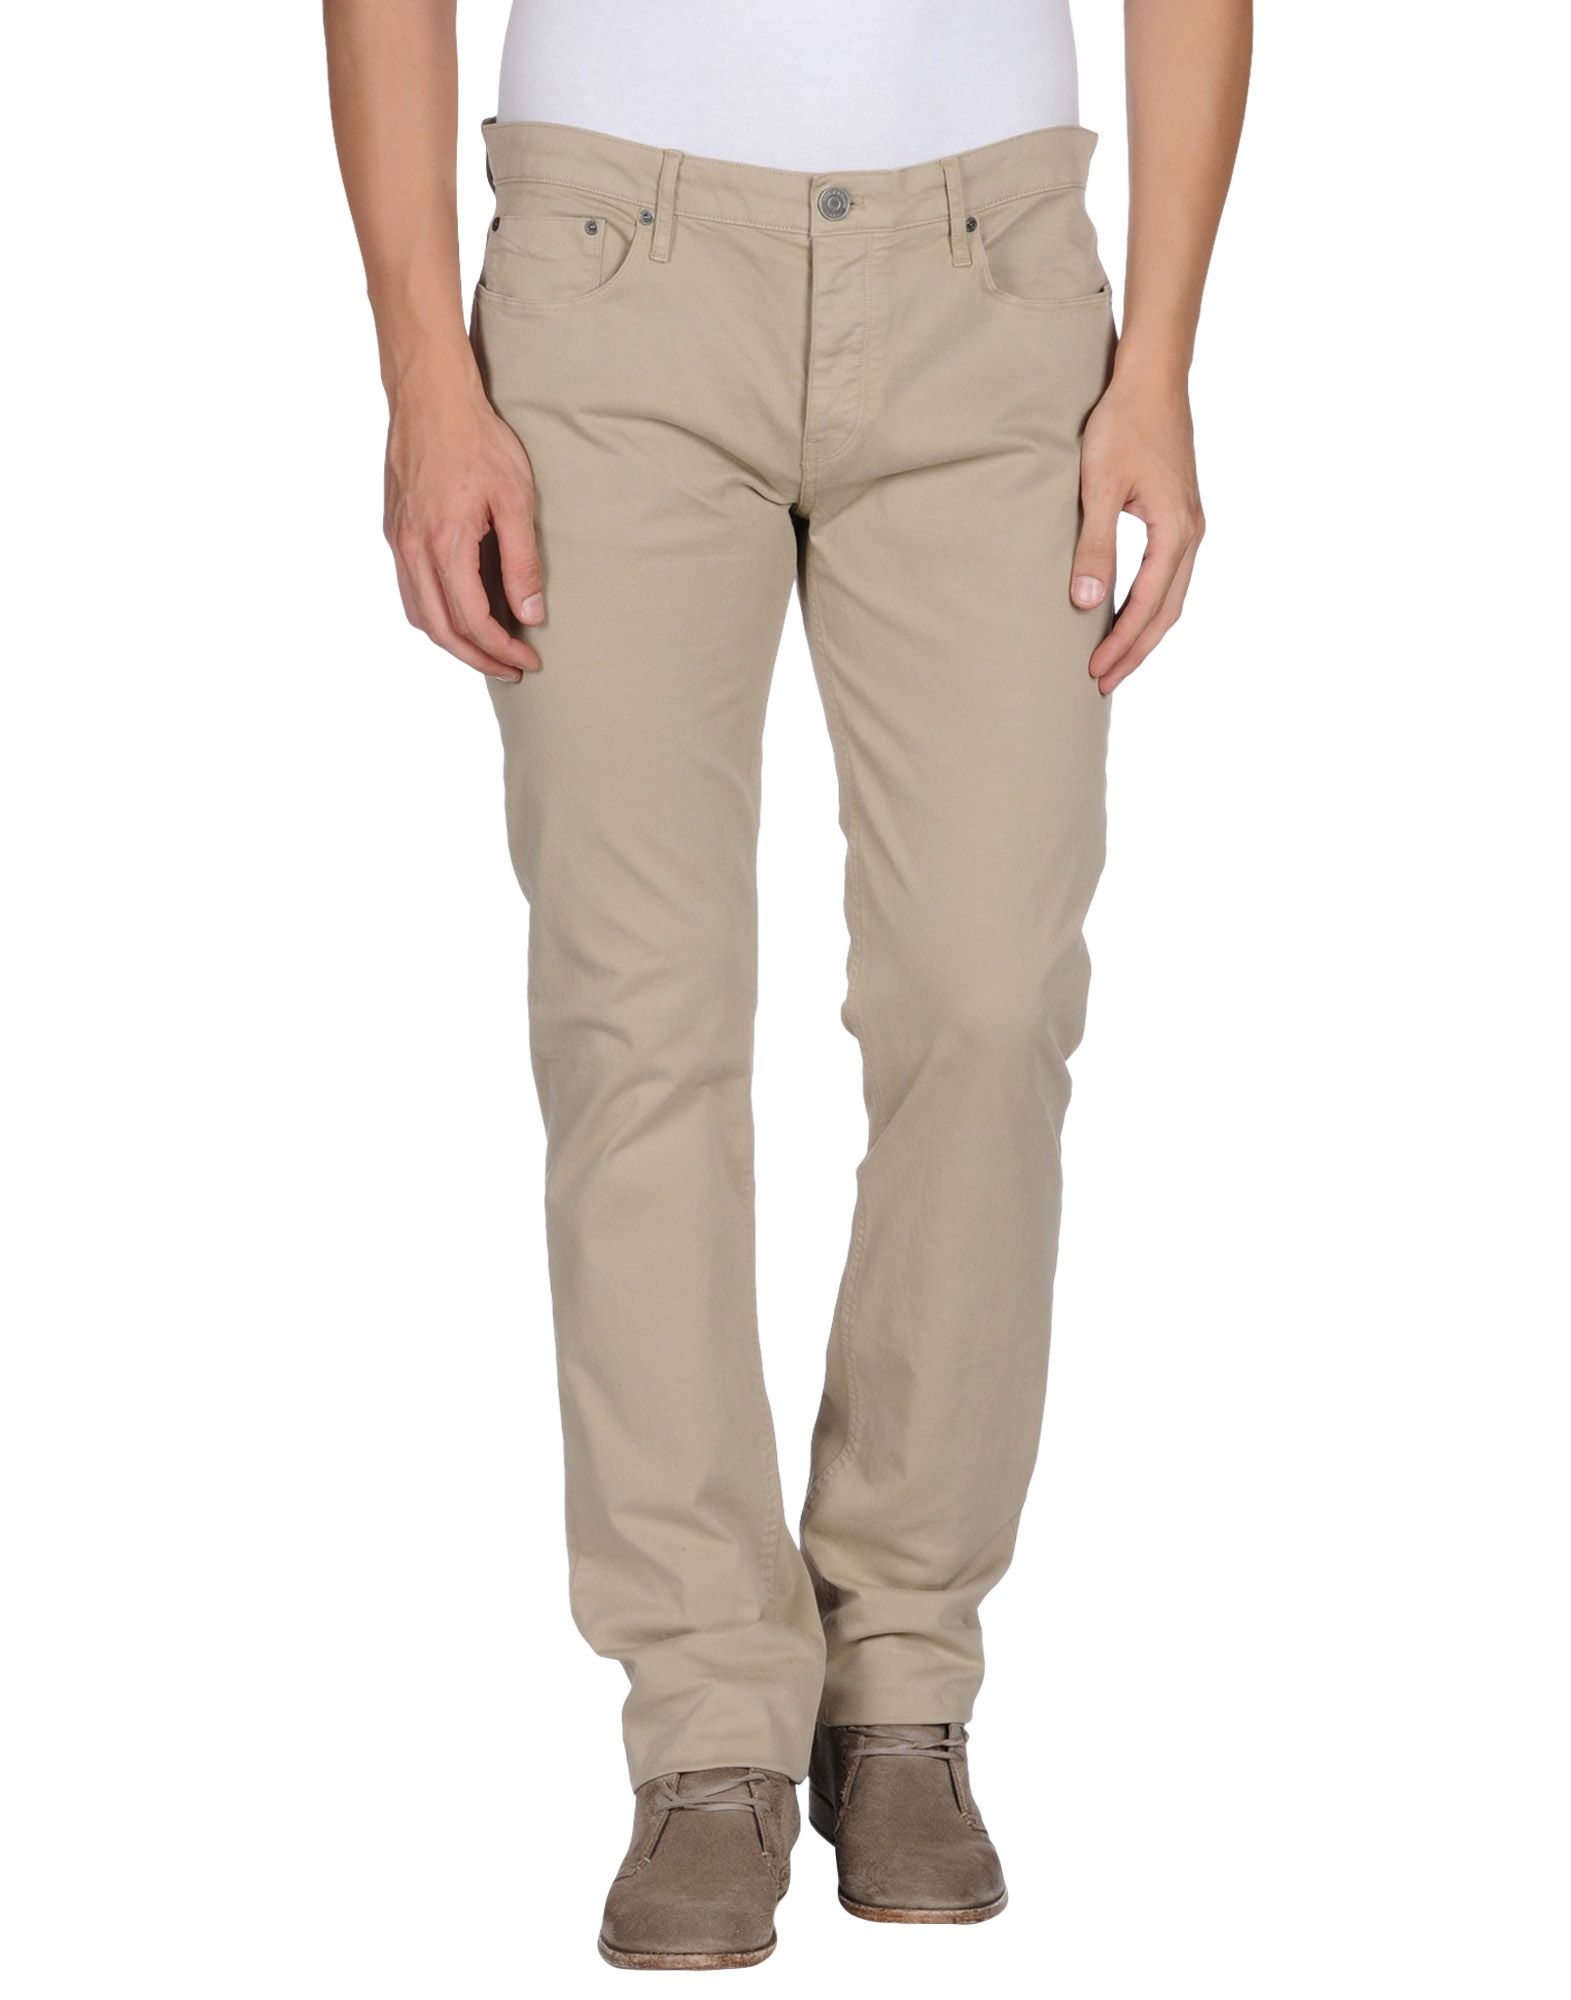 Lyst - Burberry Brit Casual Trouser in Natural for Men